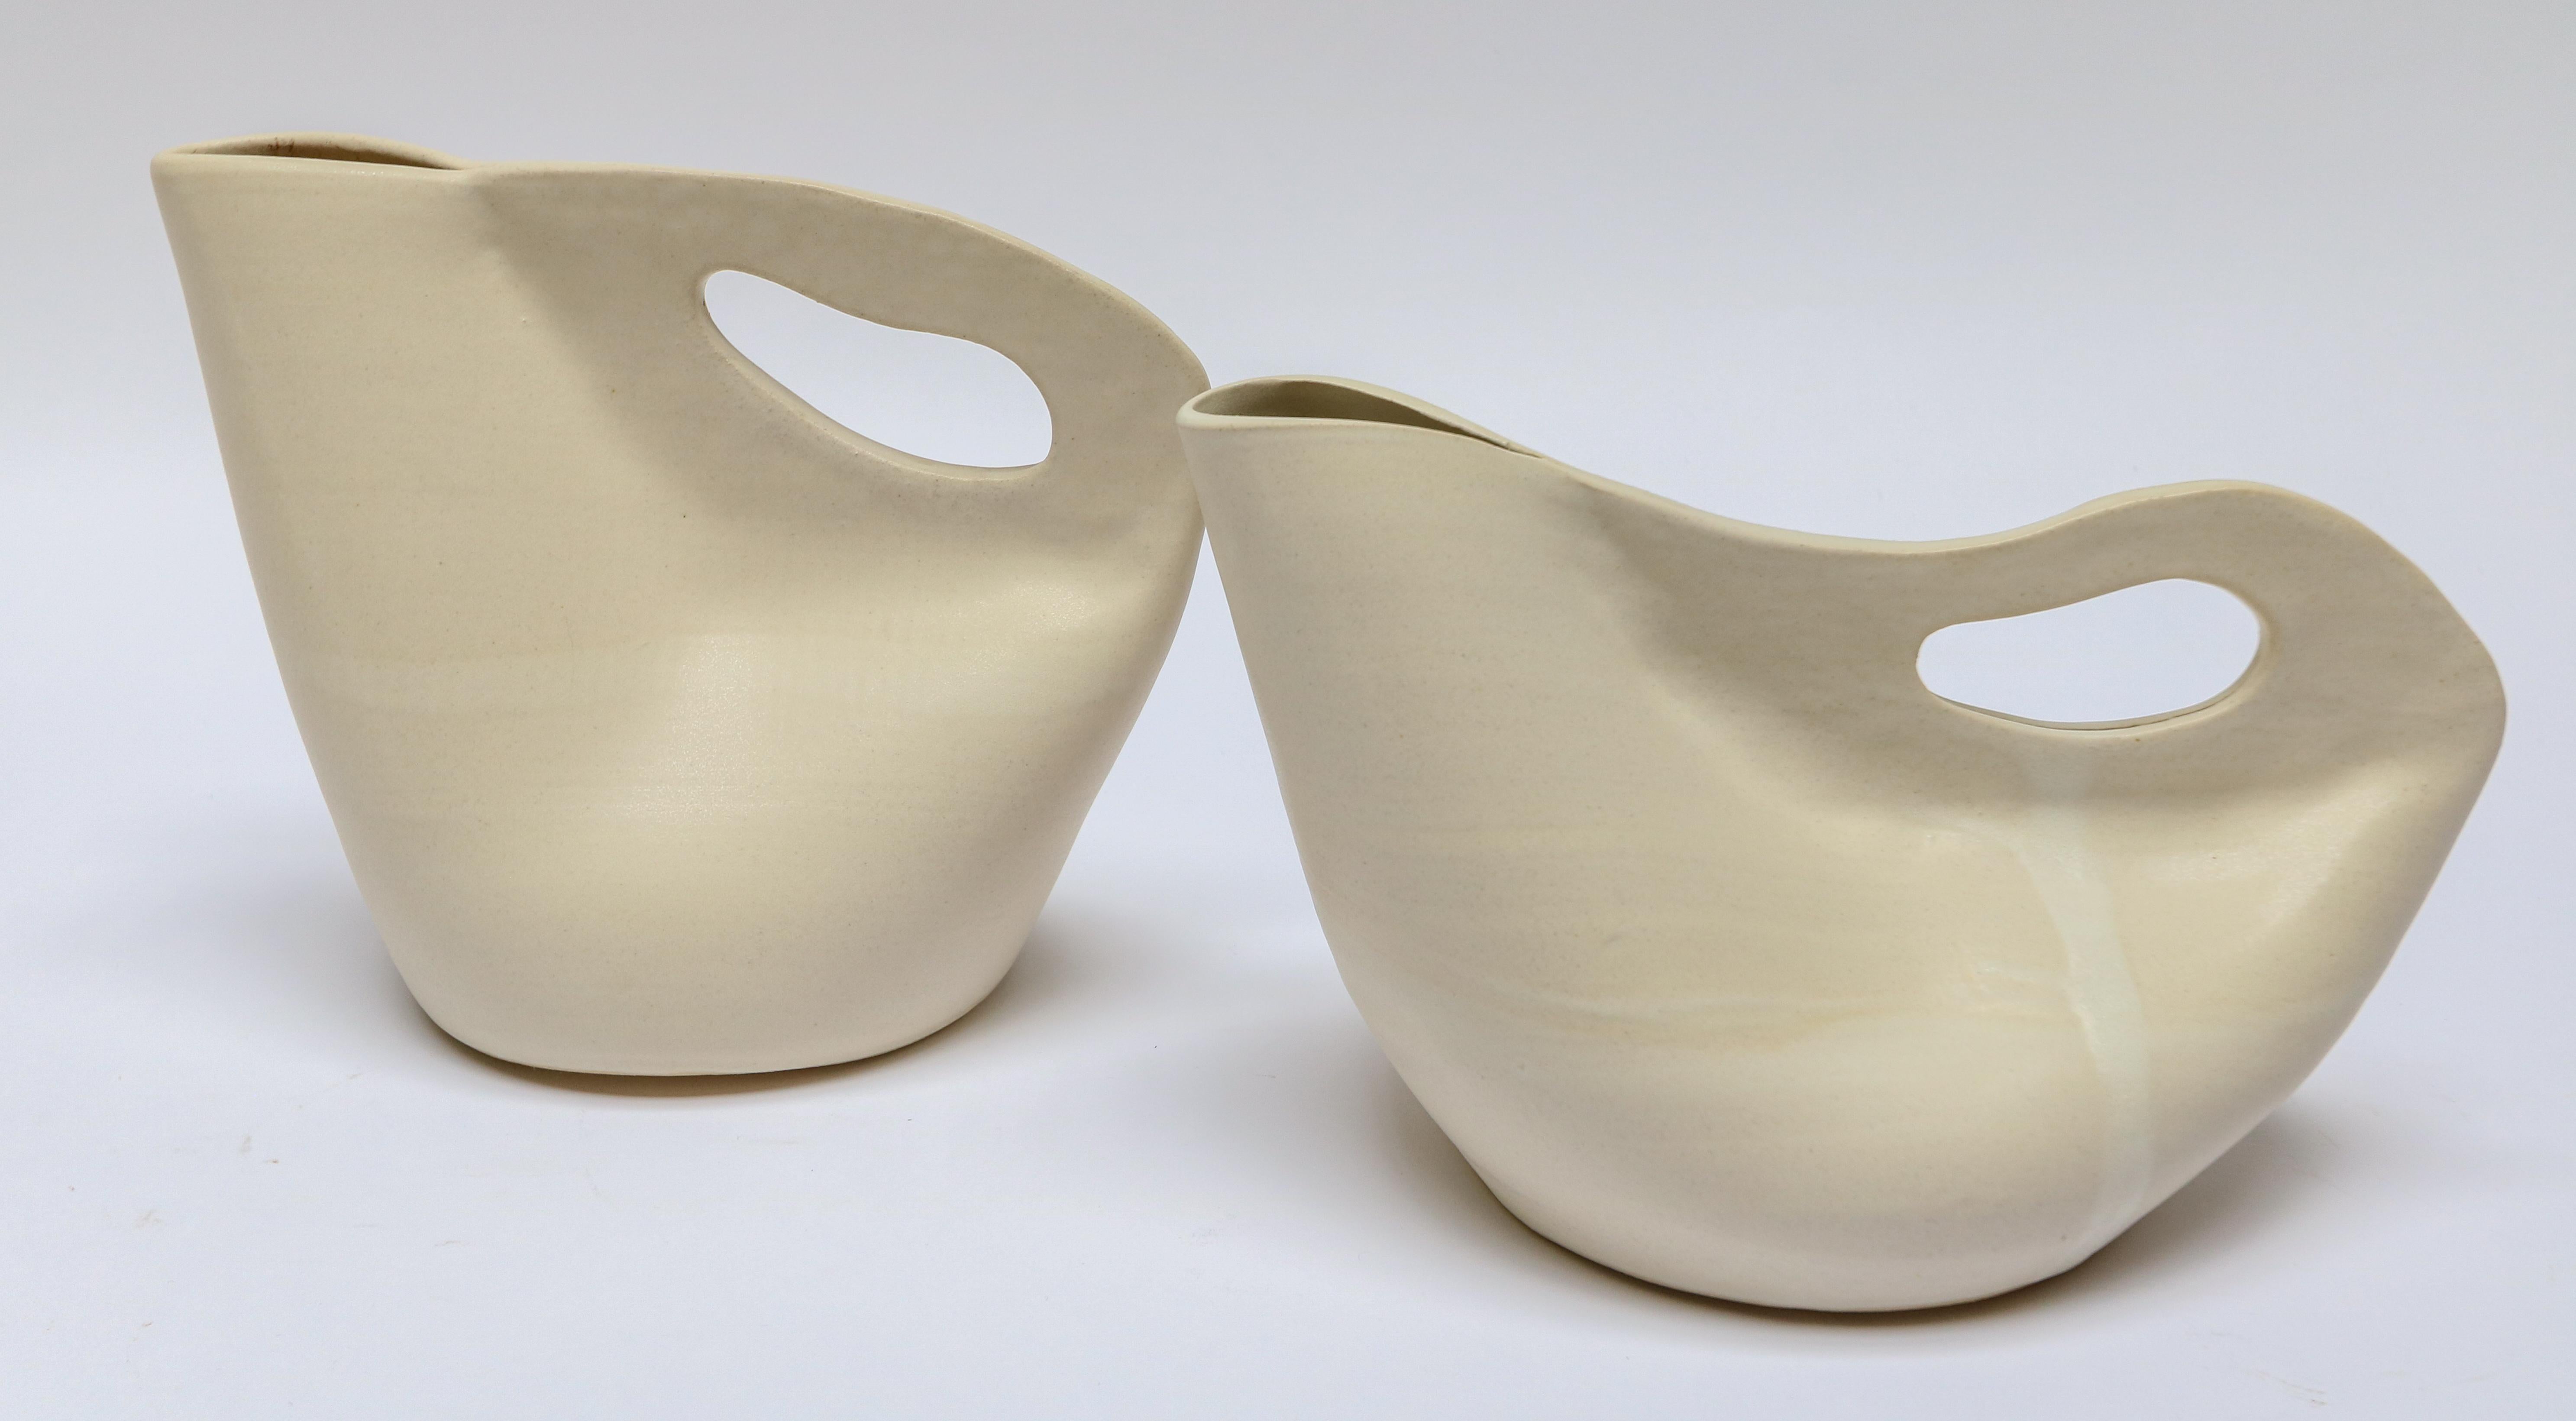 Handmade ceramic Paige pitcher and Gail pour (creamer or gravy boat) by Style Union Home in blanc white. Priced individually.

Measures: Paige pitcher (taller) 10? x 5.5? x 8.5? H (400173)–$285 each
Paige pitcher (shorter) 11? x 6? x 6.5? H